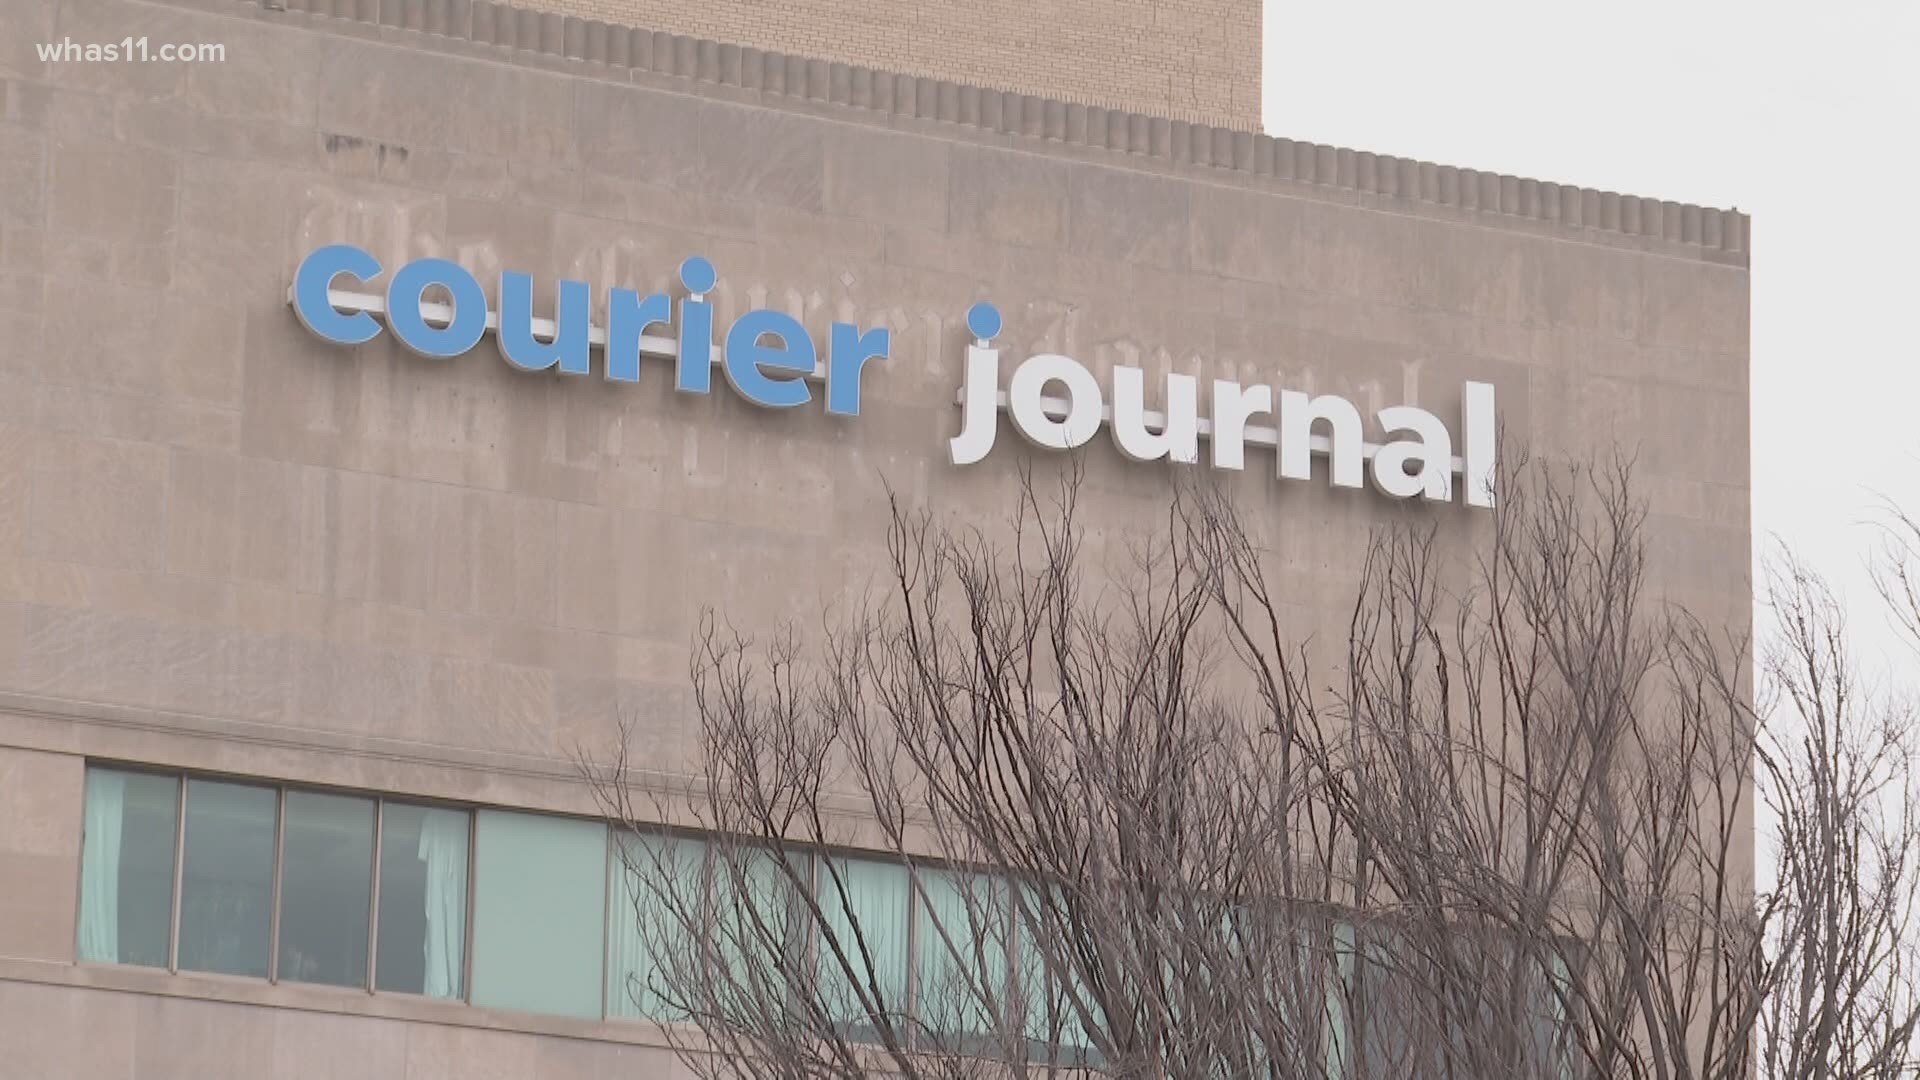 As more of our world goes digital, in just a few months, the newspaper will no longer be printed in Louisville.